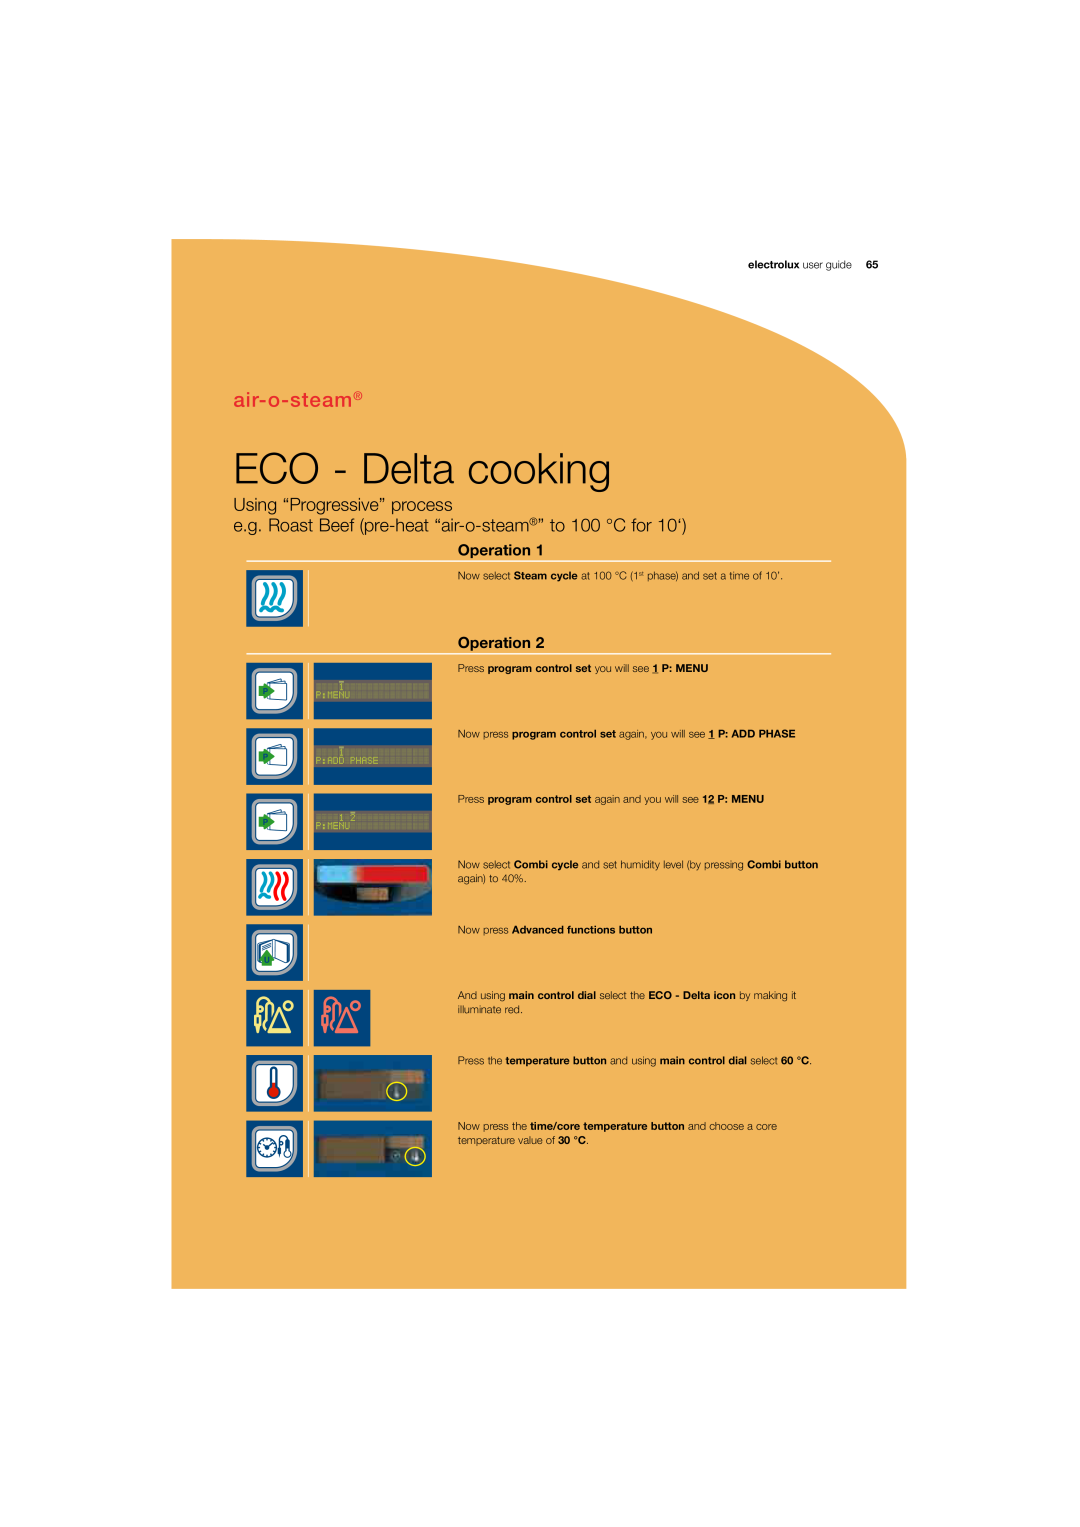 Electrolux 180 manual ECO - Delta cooking, air-o-steam, Using “Progressive” process, Operation, electrolux user guide 